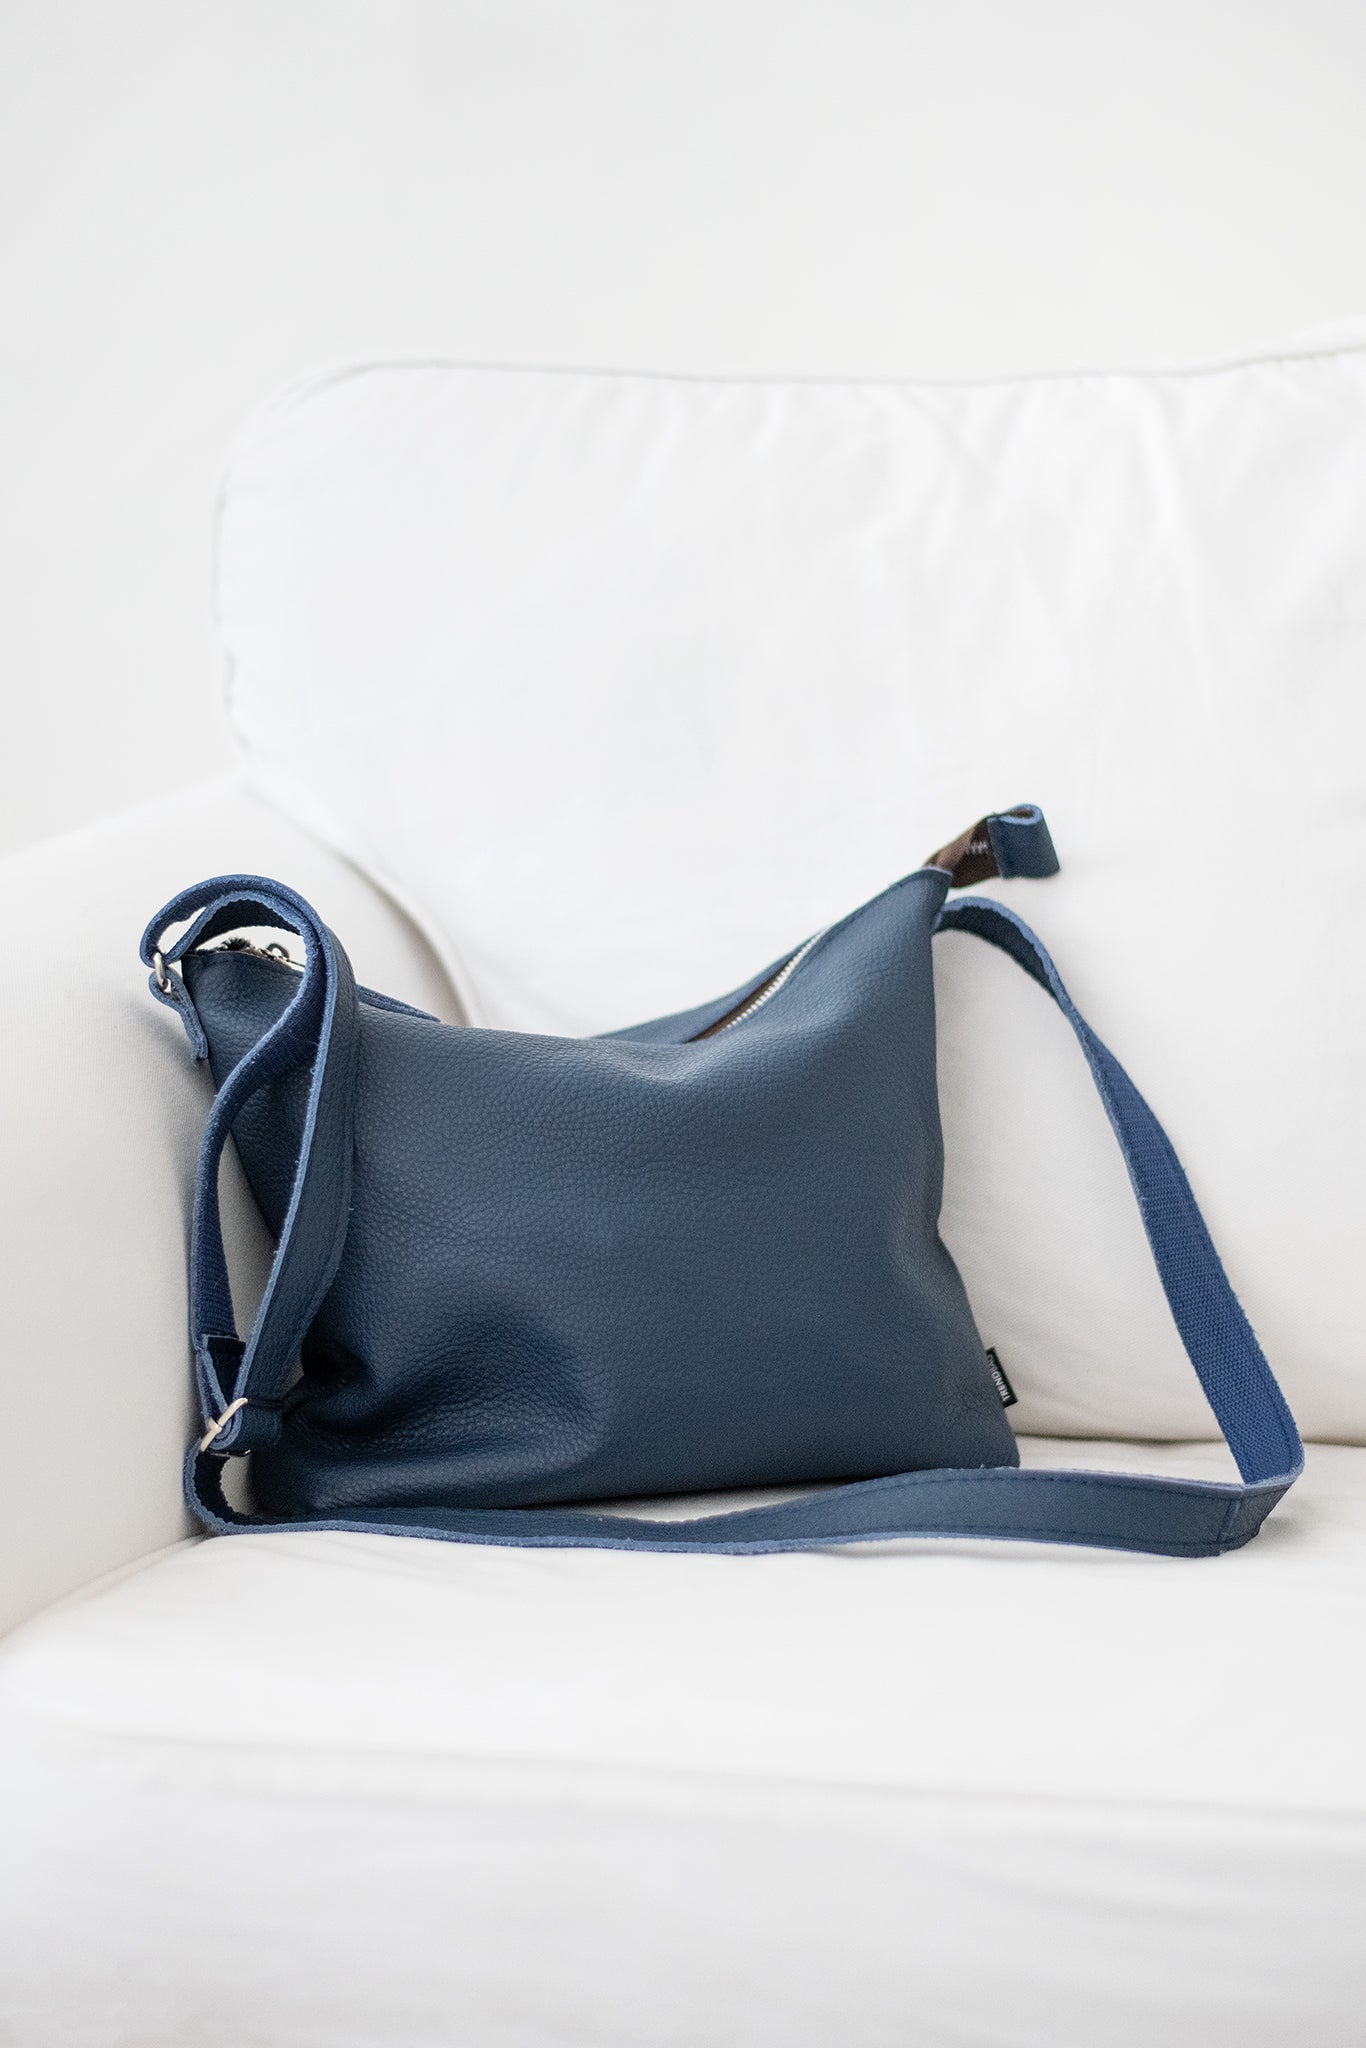 Handmade Anet L shoulder bag crafted from high-quality leather leftovers, uniquely designed in Estonia by Trendbag. Eco-friendly and durable.